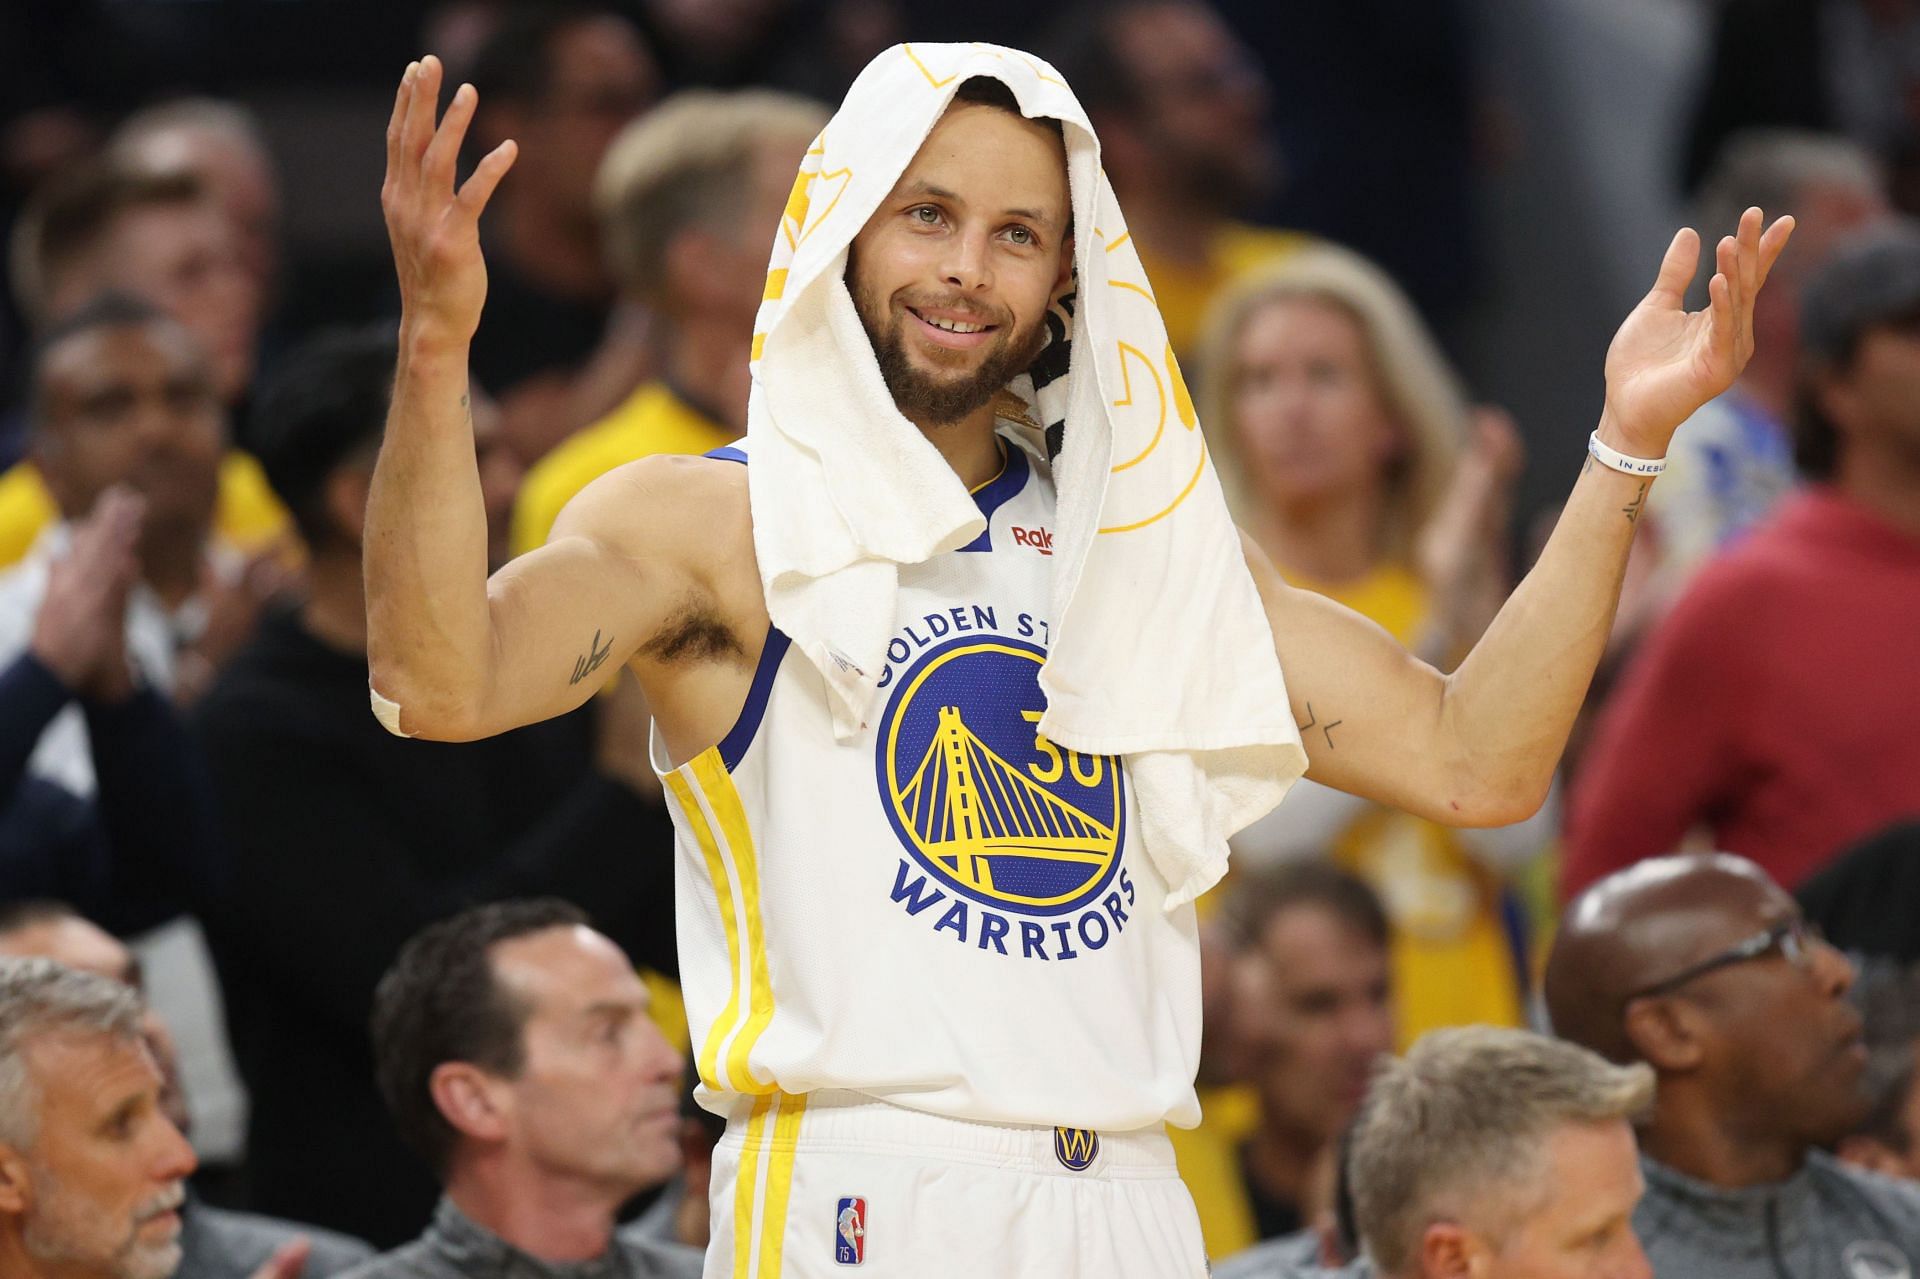 Despite the below-average performance, Colin Cowherd is not worried about Curry.